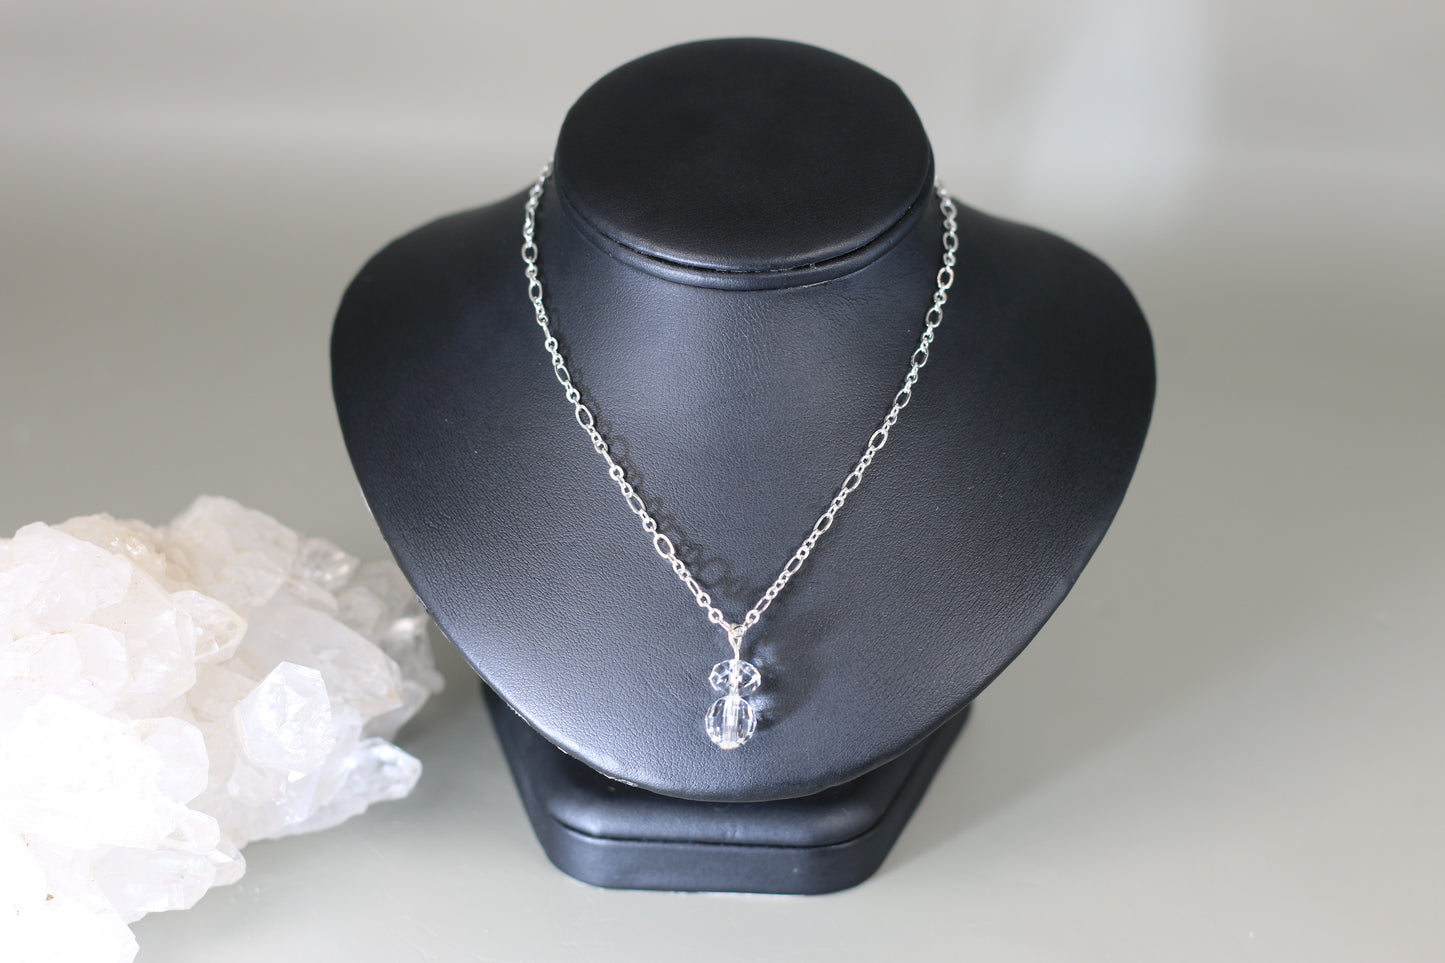 Chessboard Clear & Clear Rondelle Austrian Crystals 18" Figaro Chain Necklace with Sterling Silver Components - Annabel's Jewelry & Leather